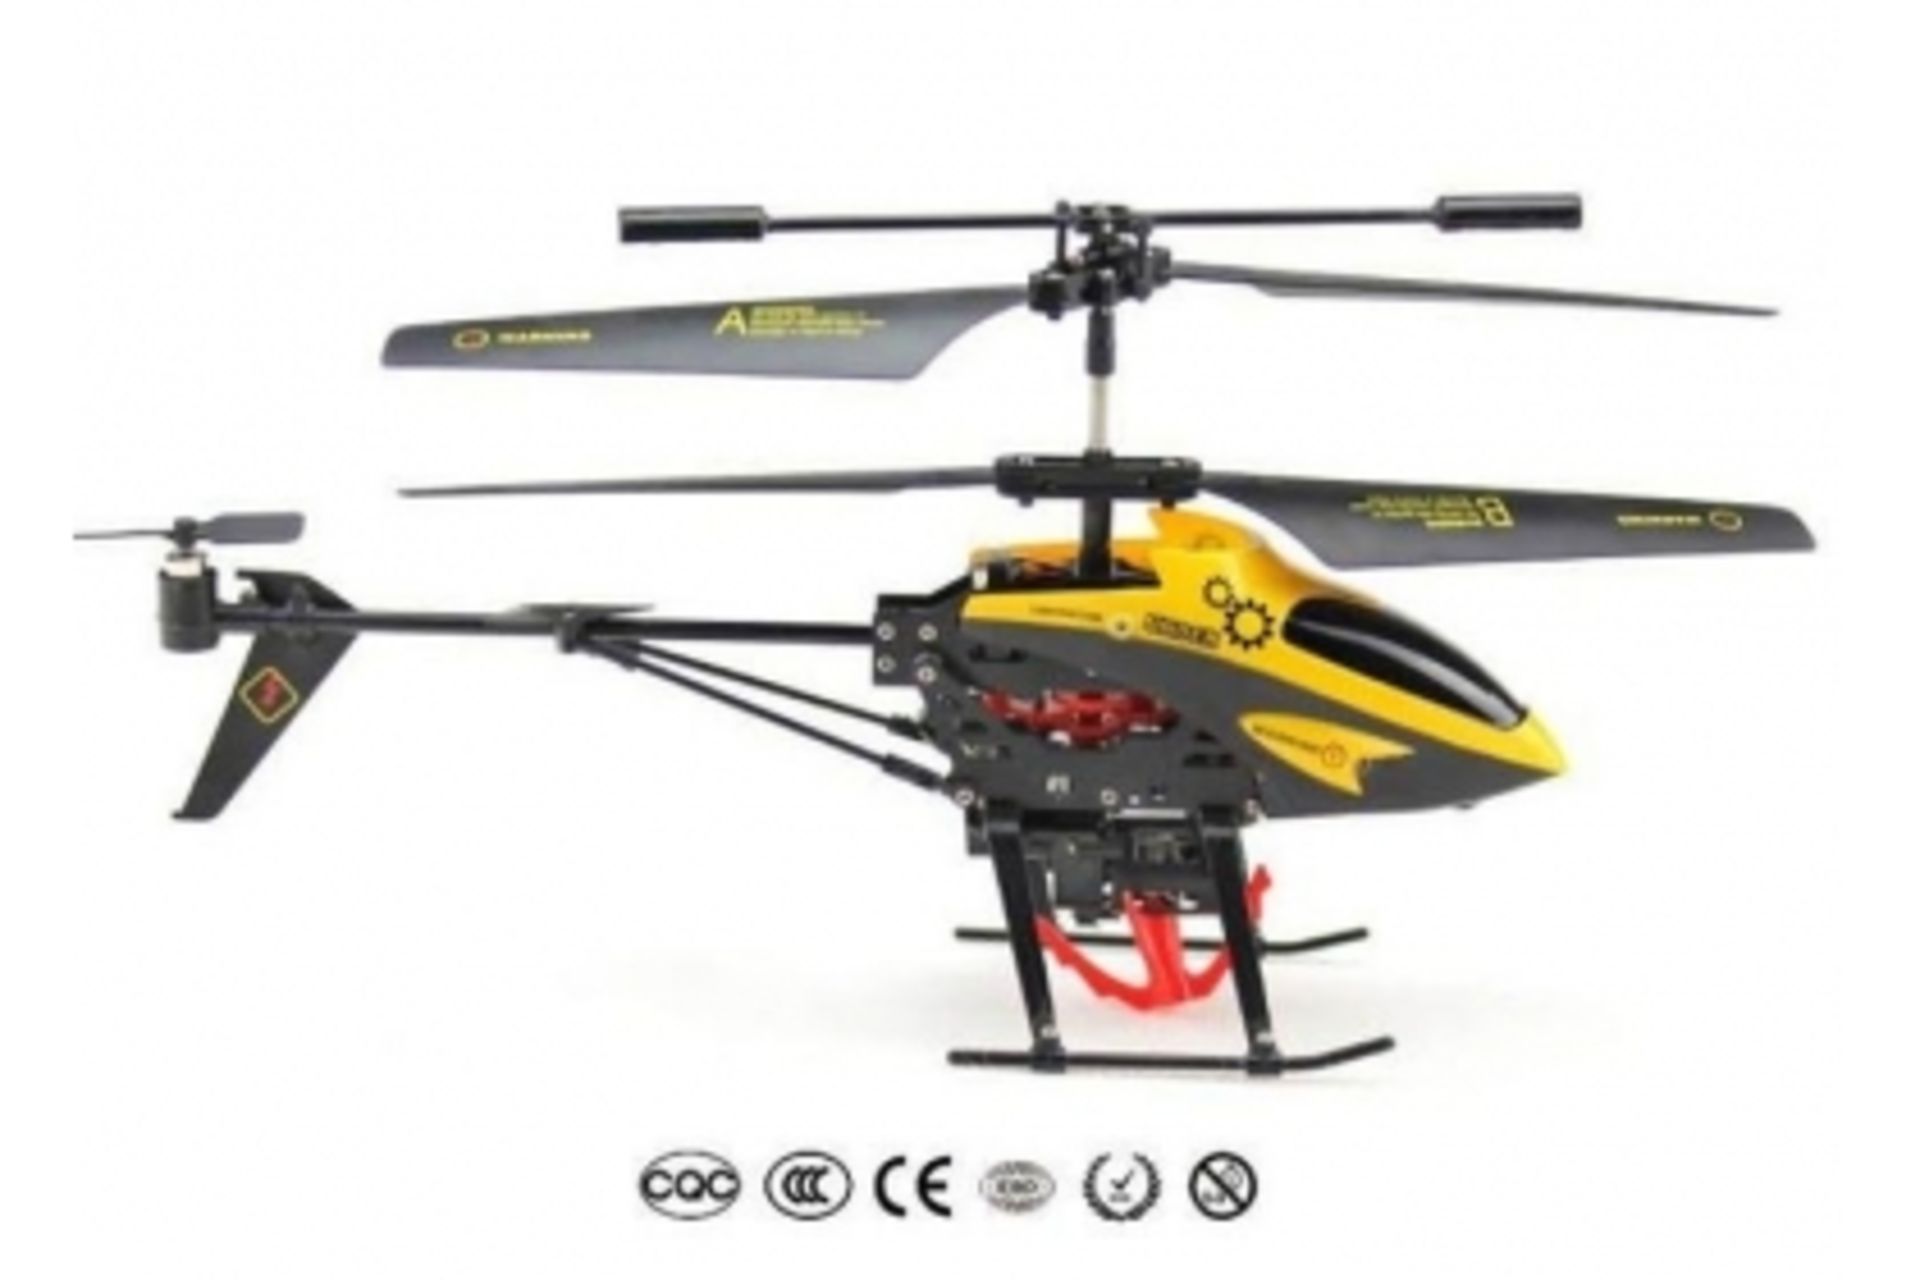 V  Grade A Infrared controlled Cargo Helicopter RRP £79.99 With 3-channel gyro and trim active - Image 2 of 2